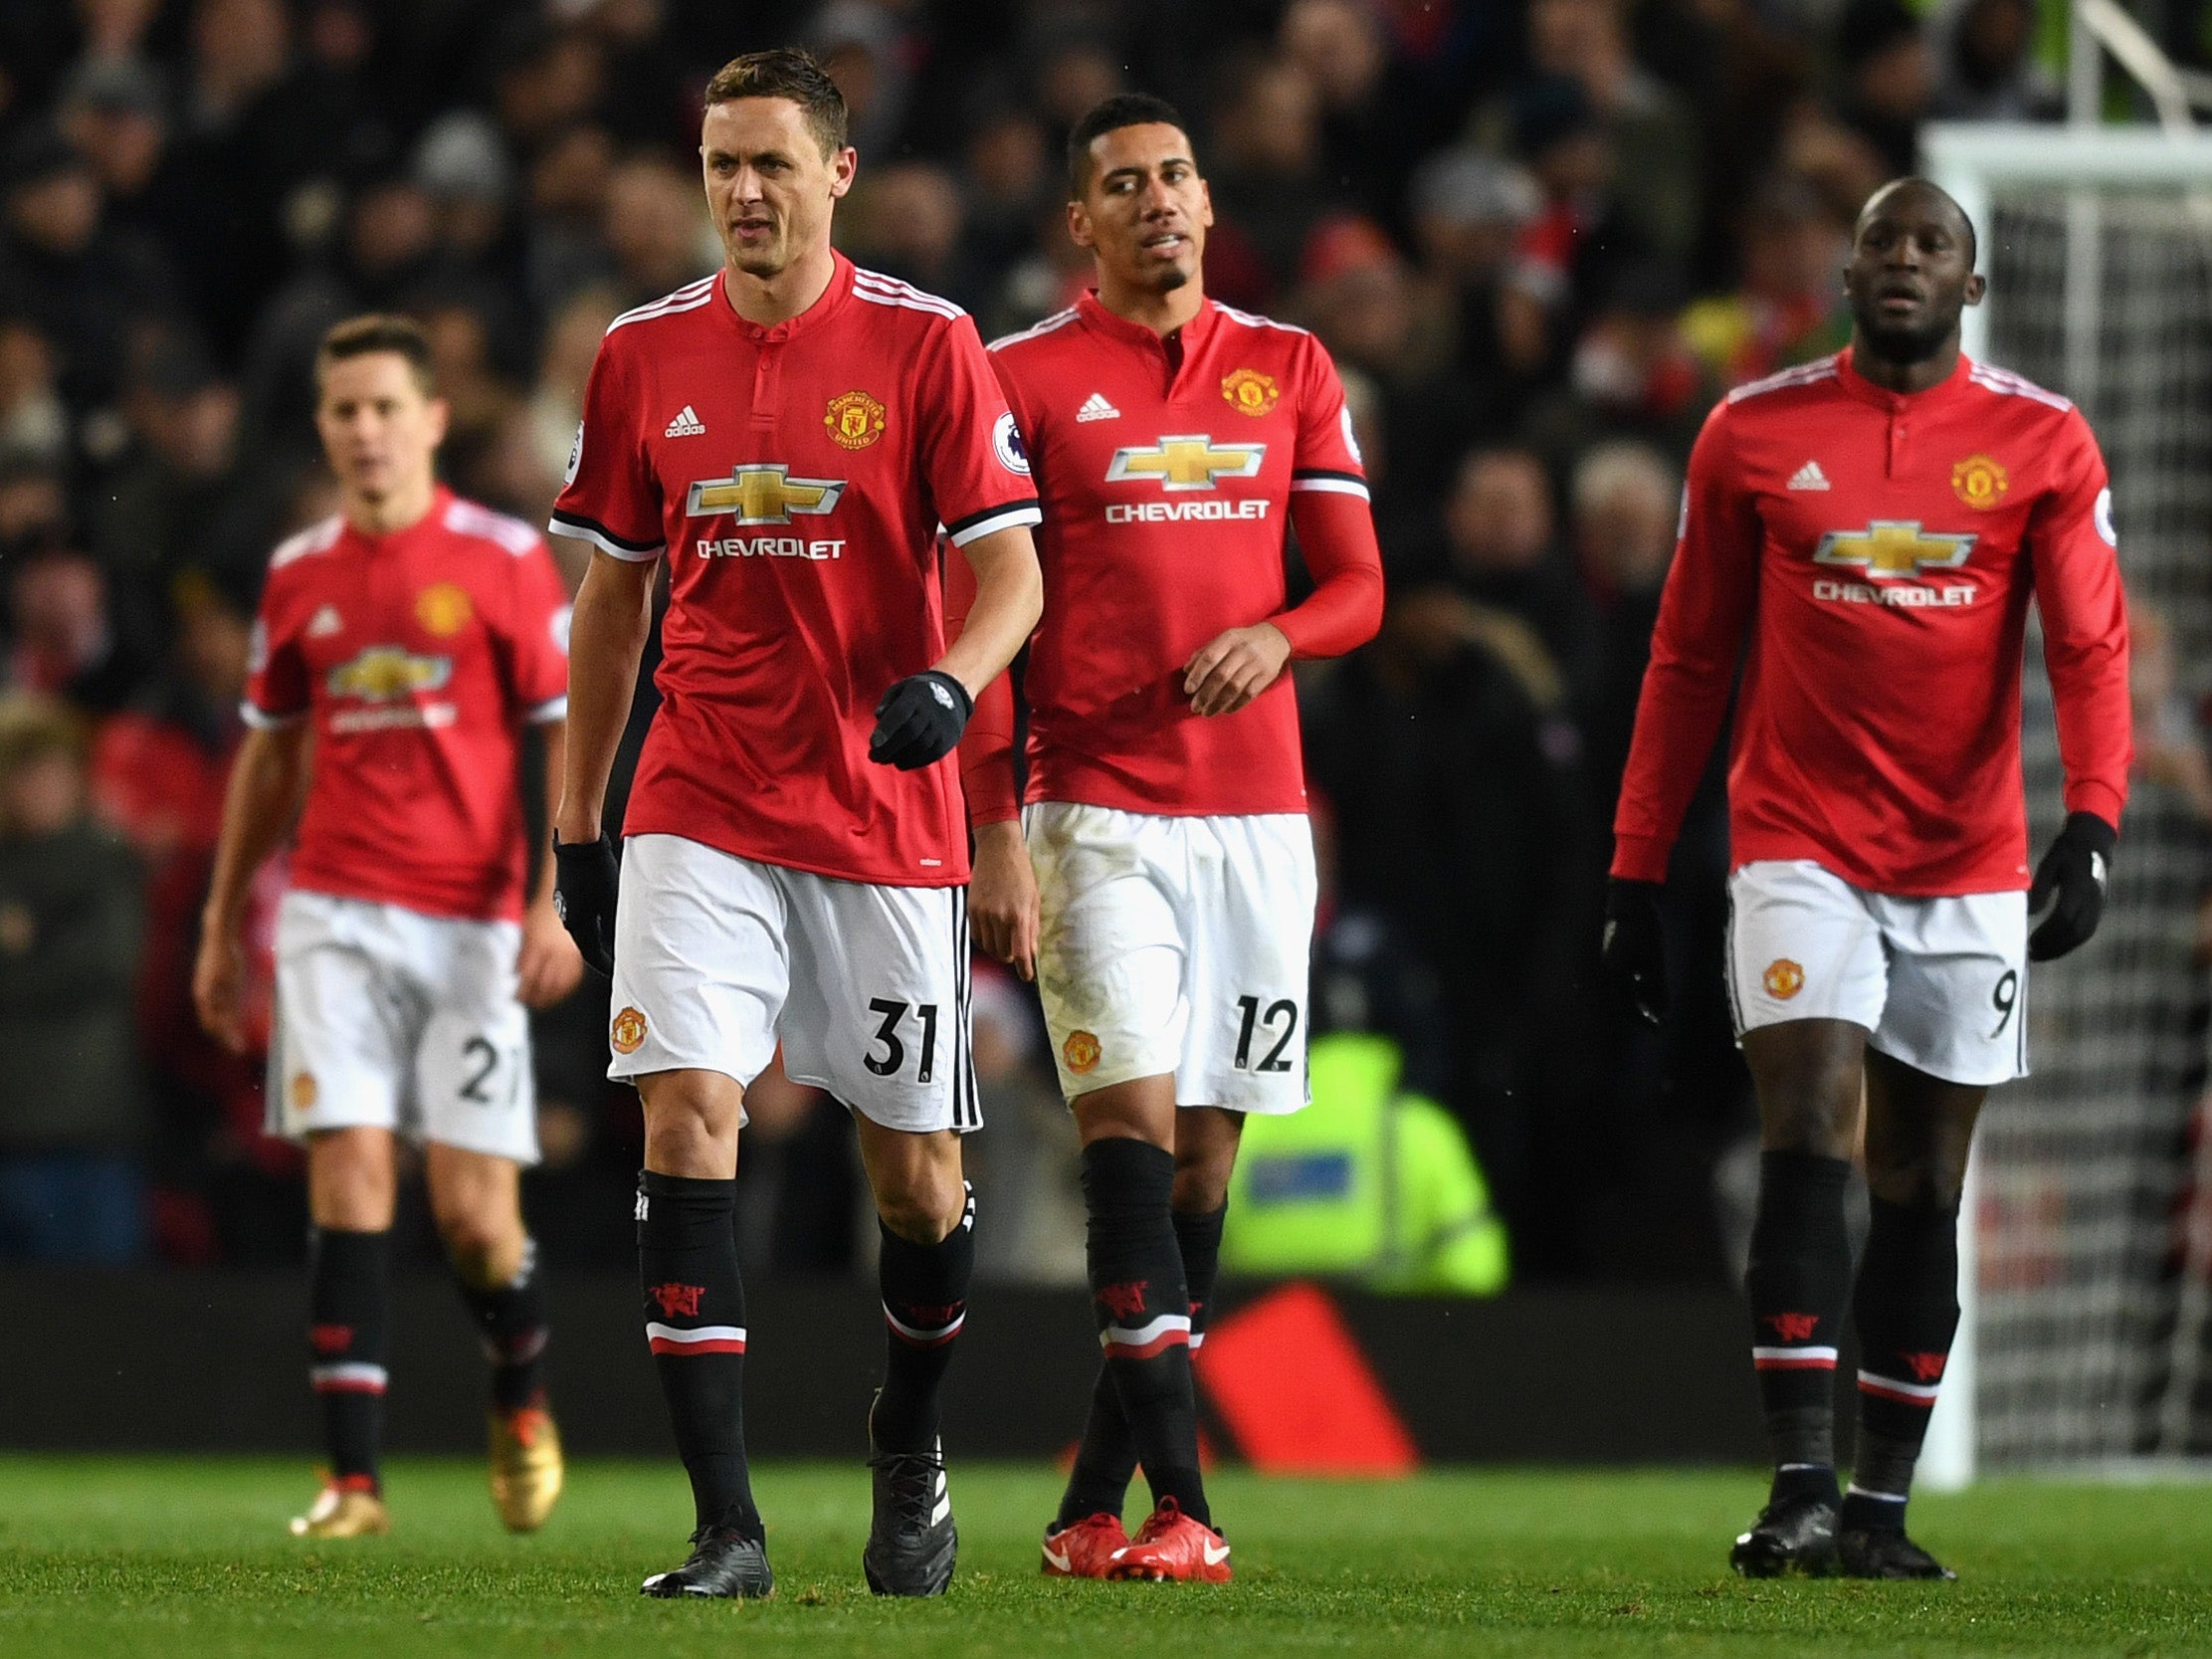 Manchester United were outclassed for large parts of Sunday's derby